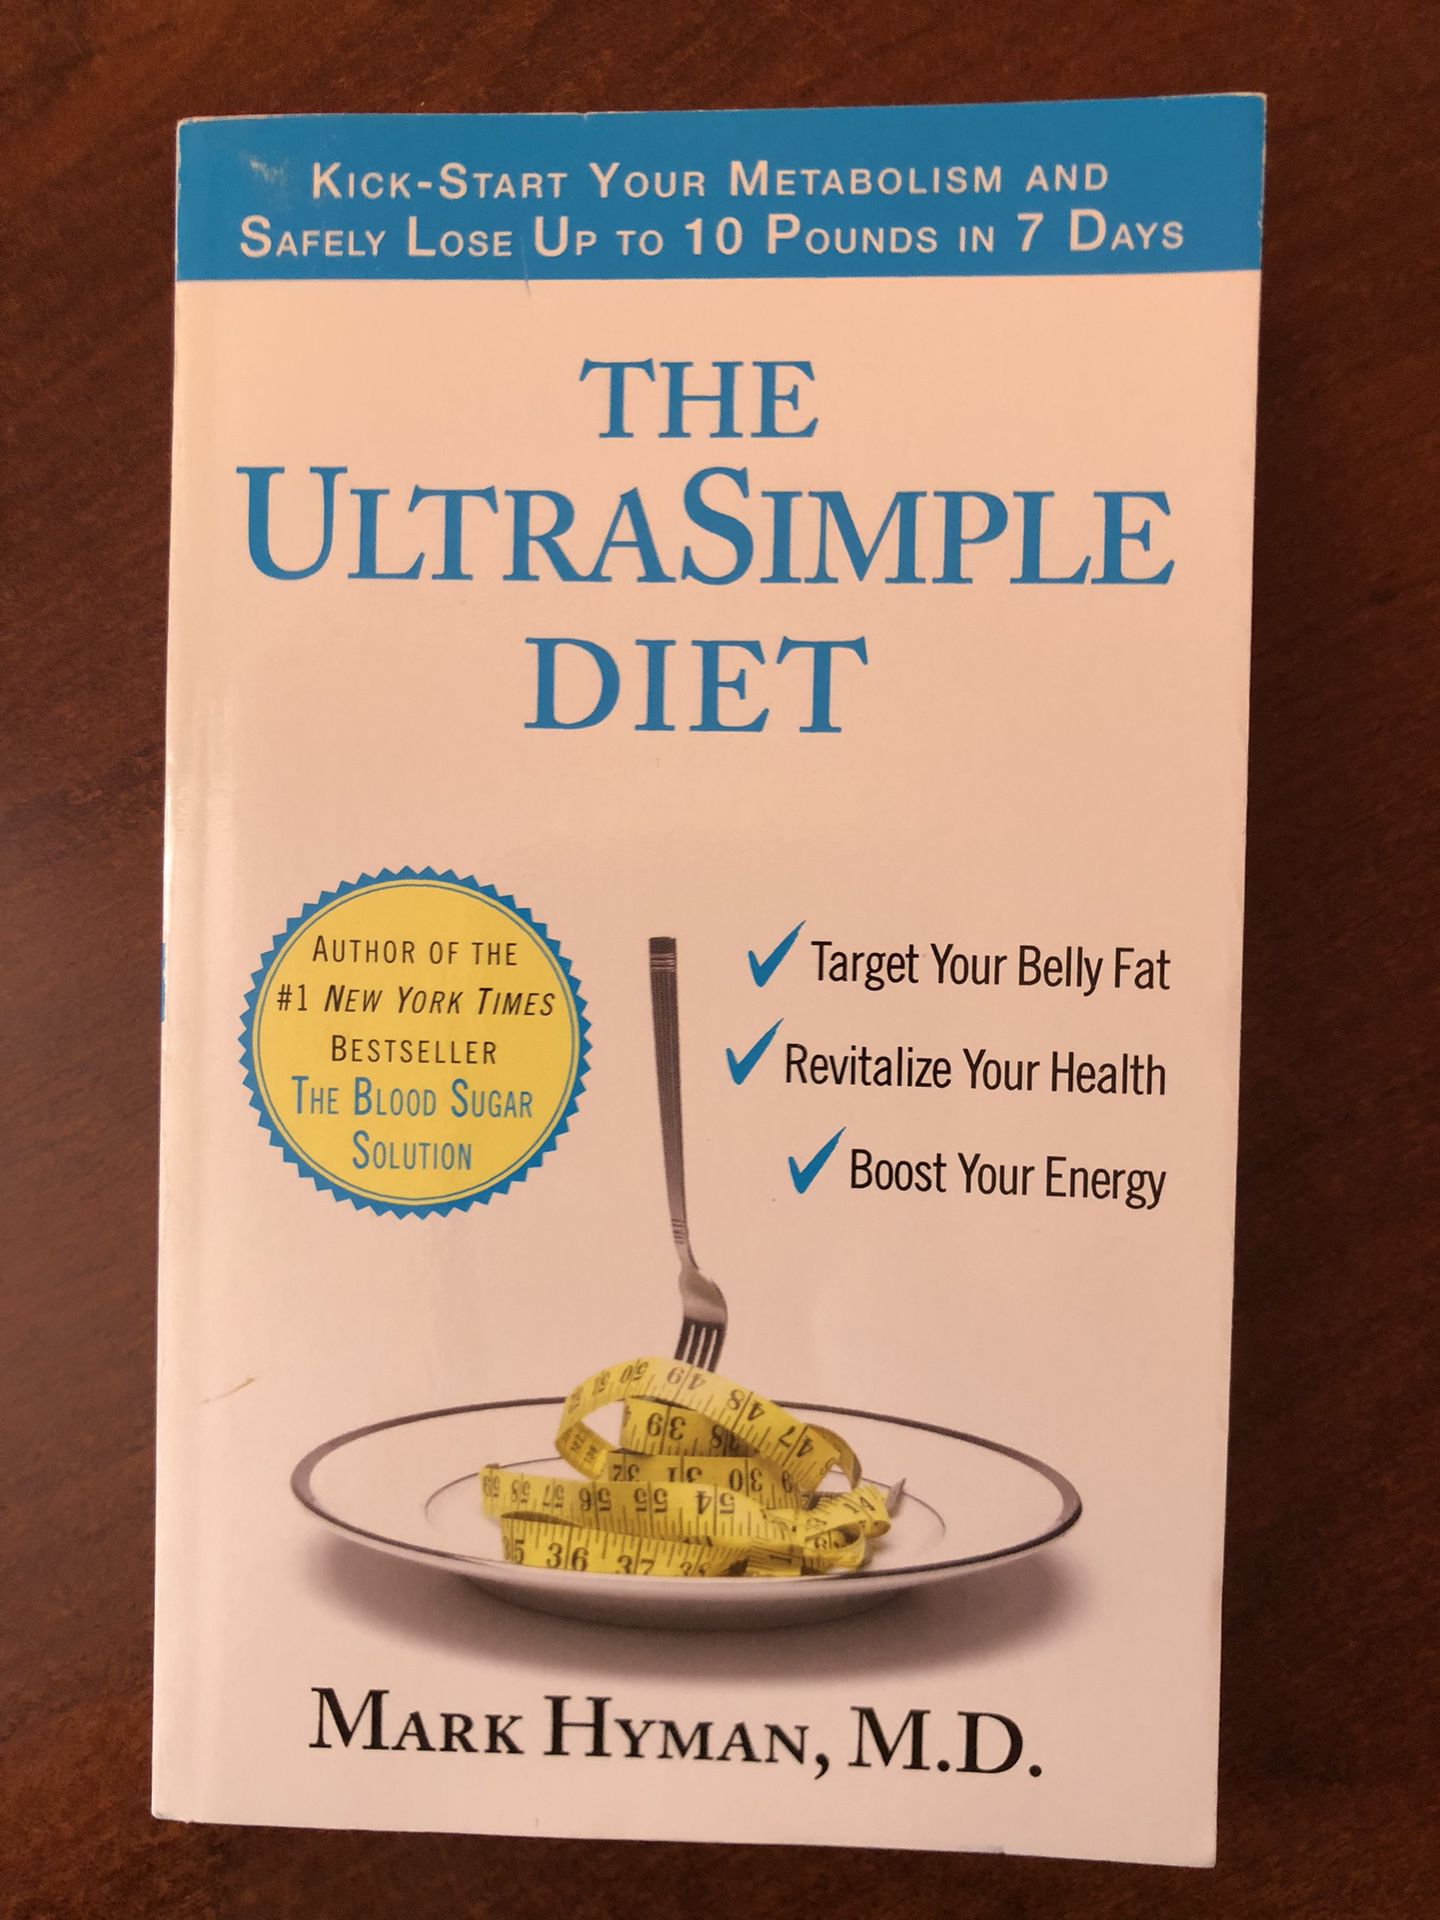 The UltraSimple Diet : Kick-Start Your Metabolism and Safely Lose